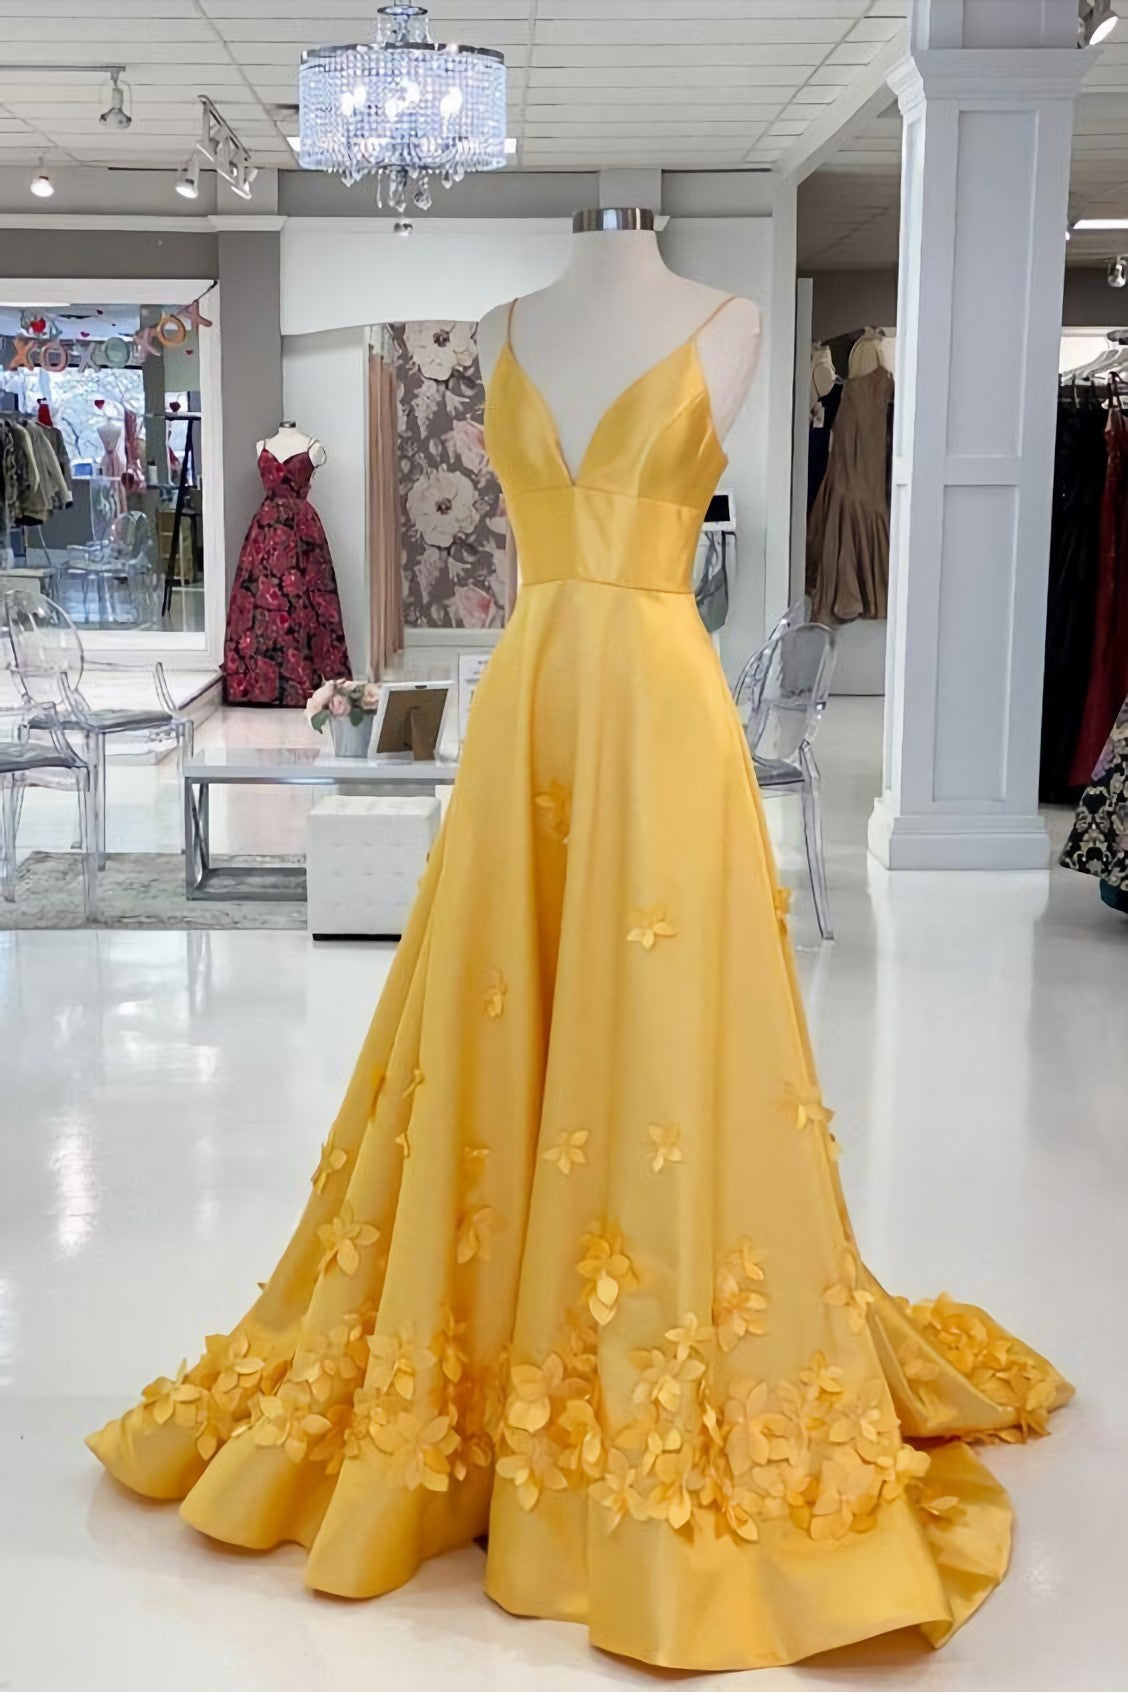 Elegant Yellow Corset Prom Dress, With Flowers outfit, Prom Dresses2029